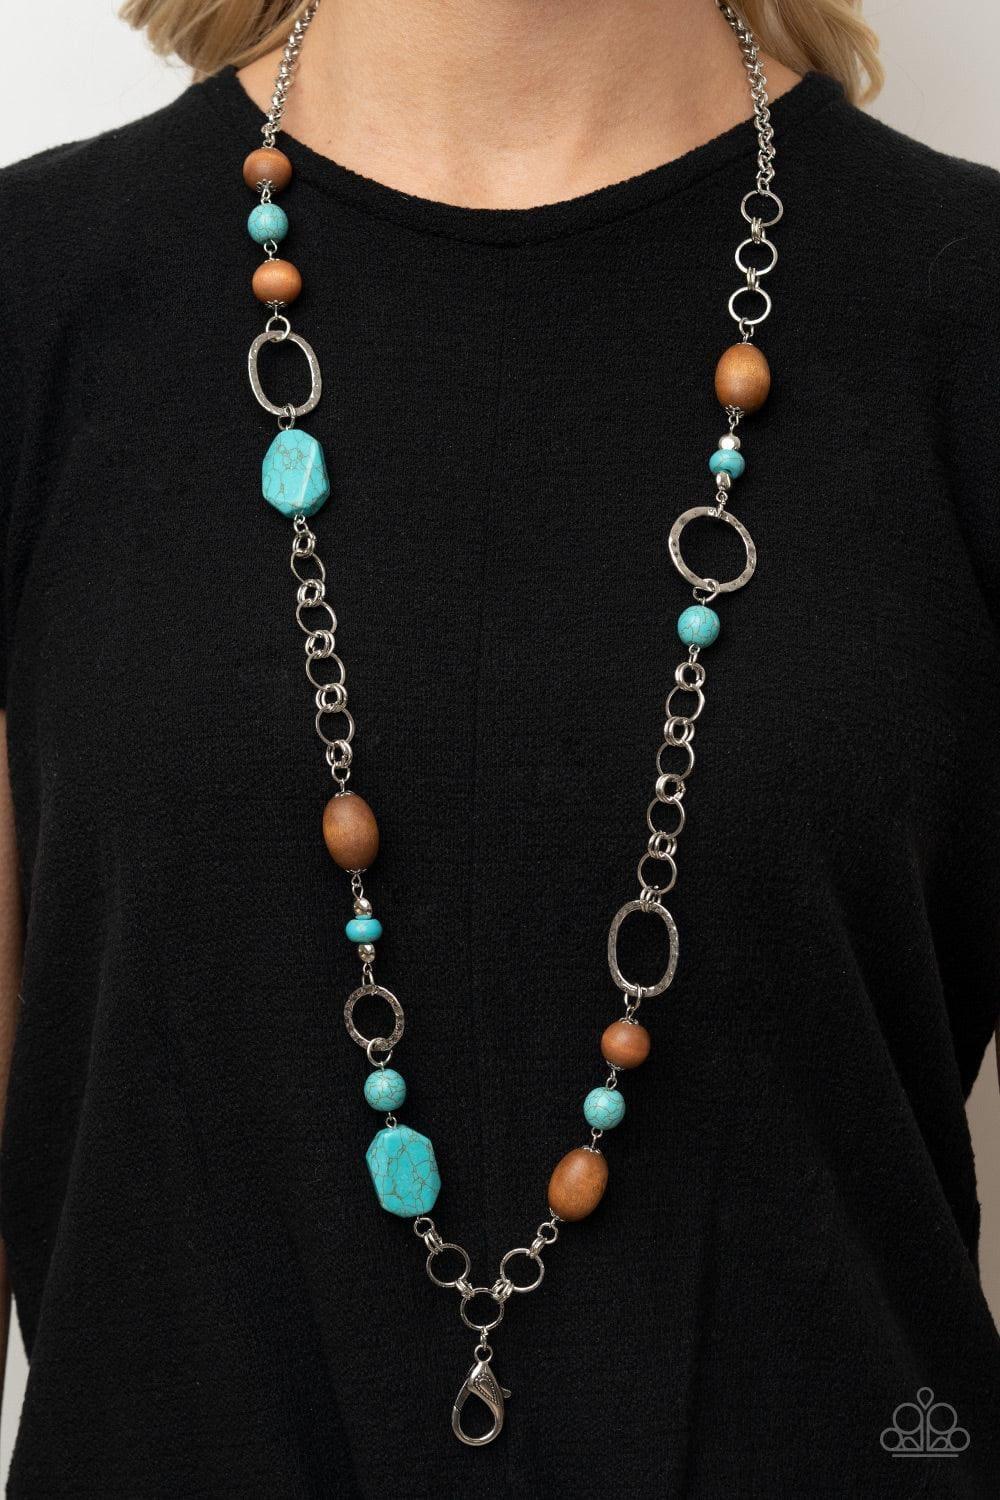 Paparazzi Accessories - Prairie Reserve - Blue Lanyard Necklace - Bling by JessieK